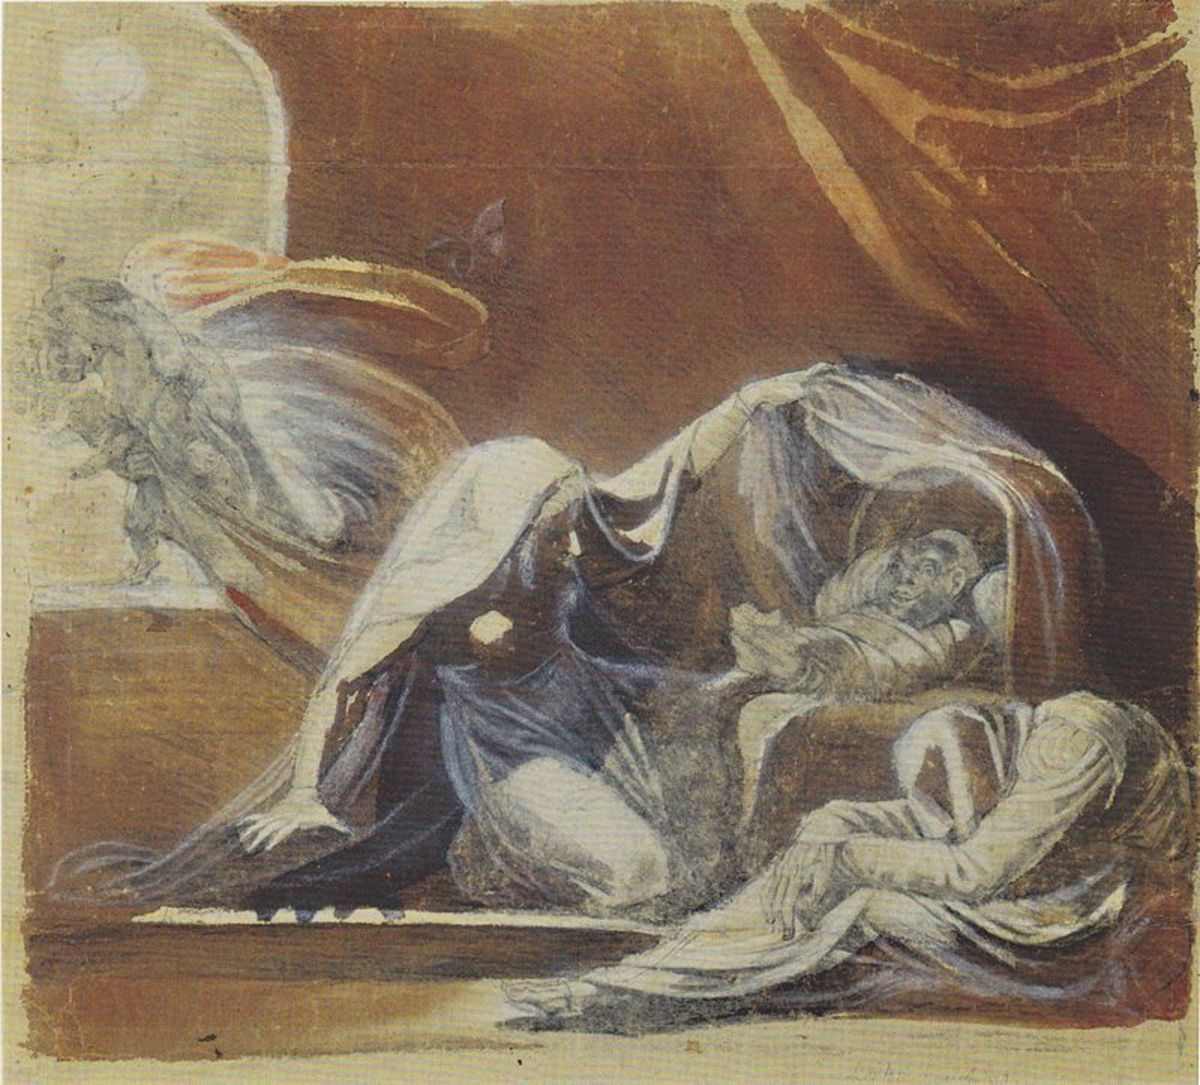 Henry Fuseli's Der Wechselbag (1781). George II thought Frederick was one and Queen Caroline argued that her grandchild could be one. They're from European folklore.